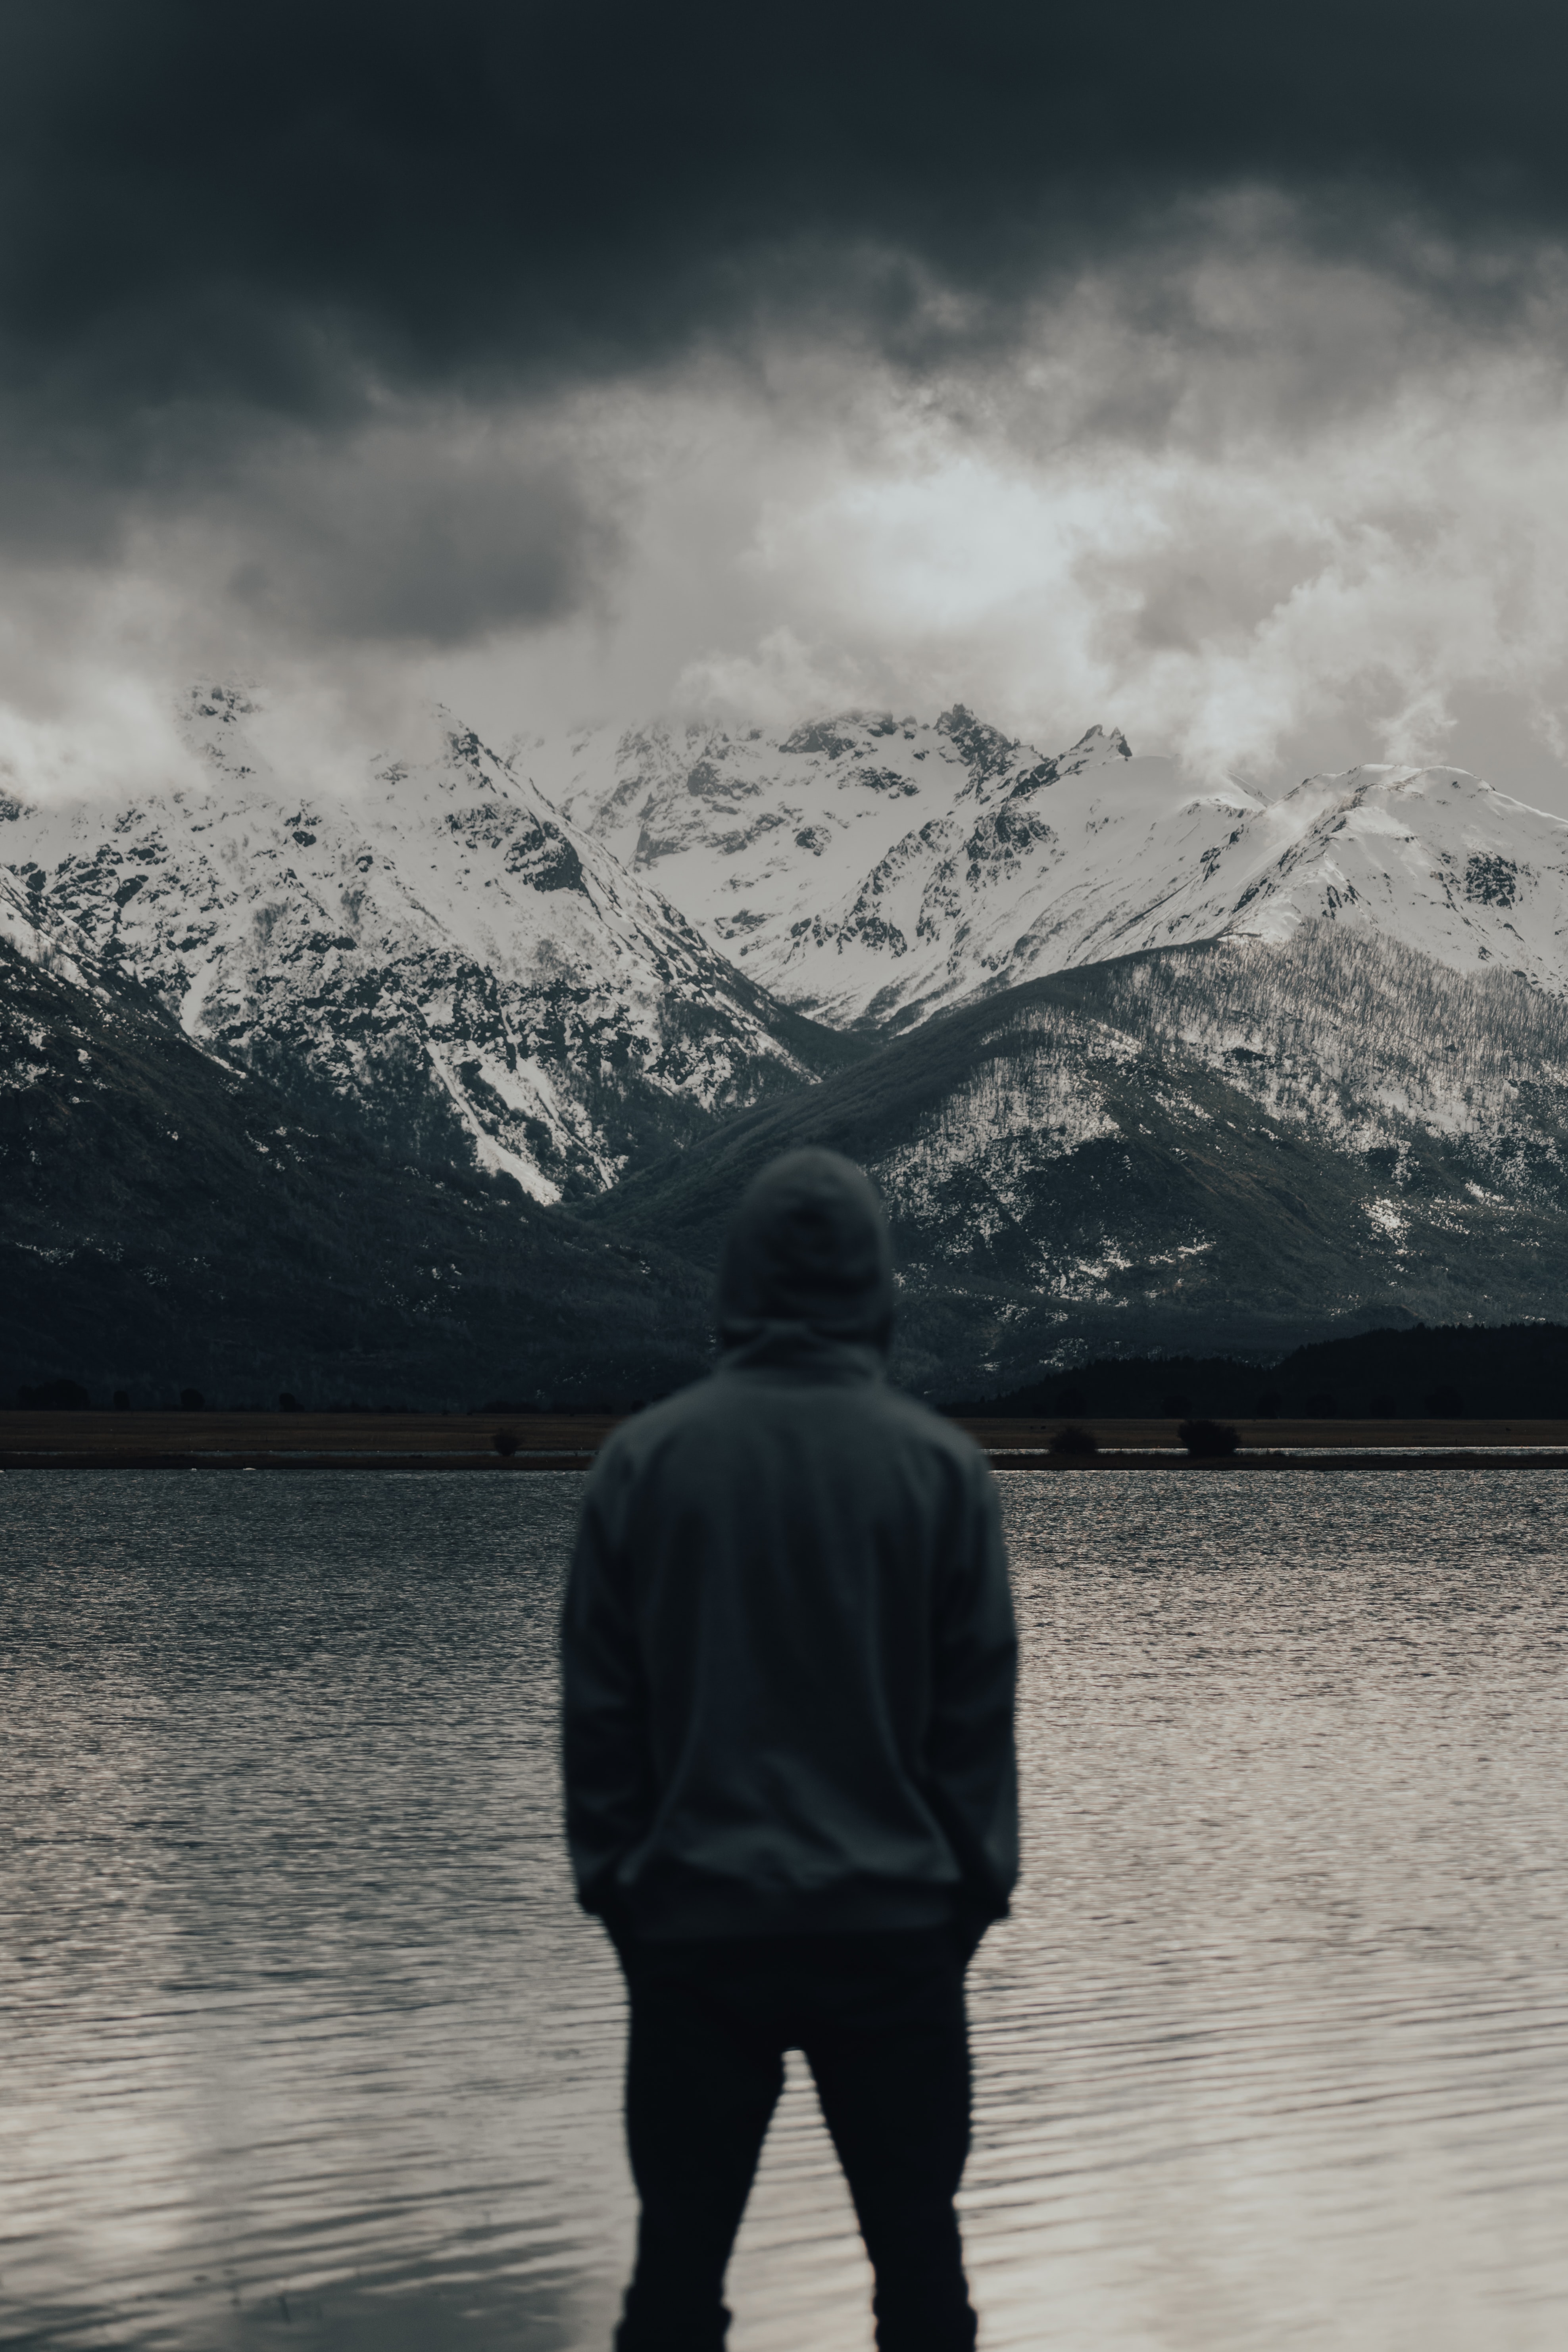 human, mountains, nature, lake, miscellanea, miscellaneous, person, loneliness iphone wallpaper